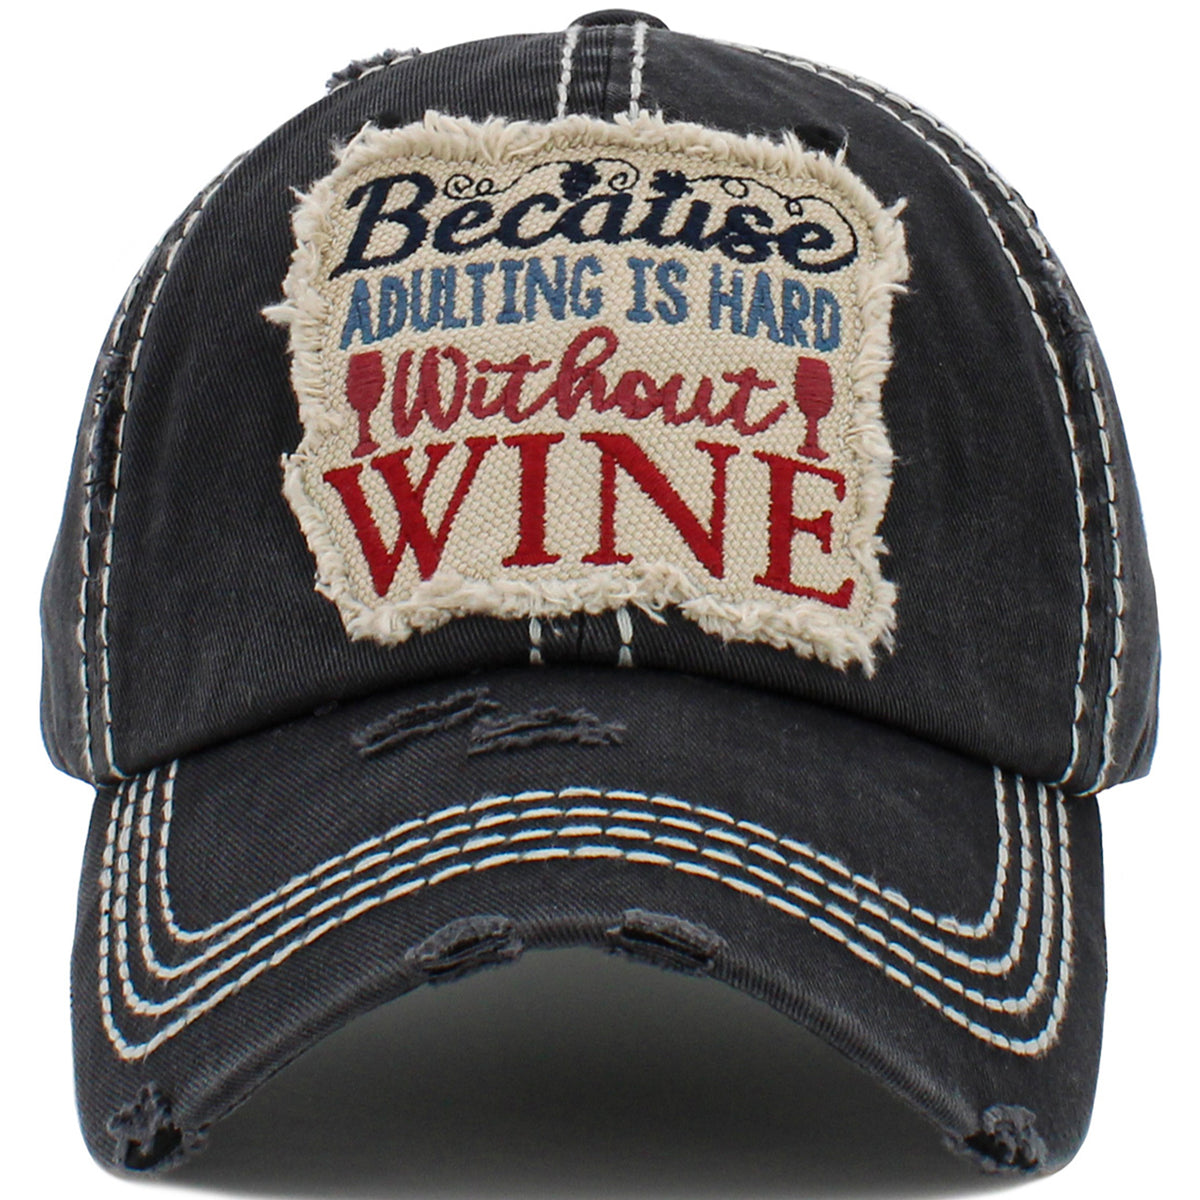 1453 - Because Adulting is Hard Without Wine Hat - Black